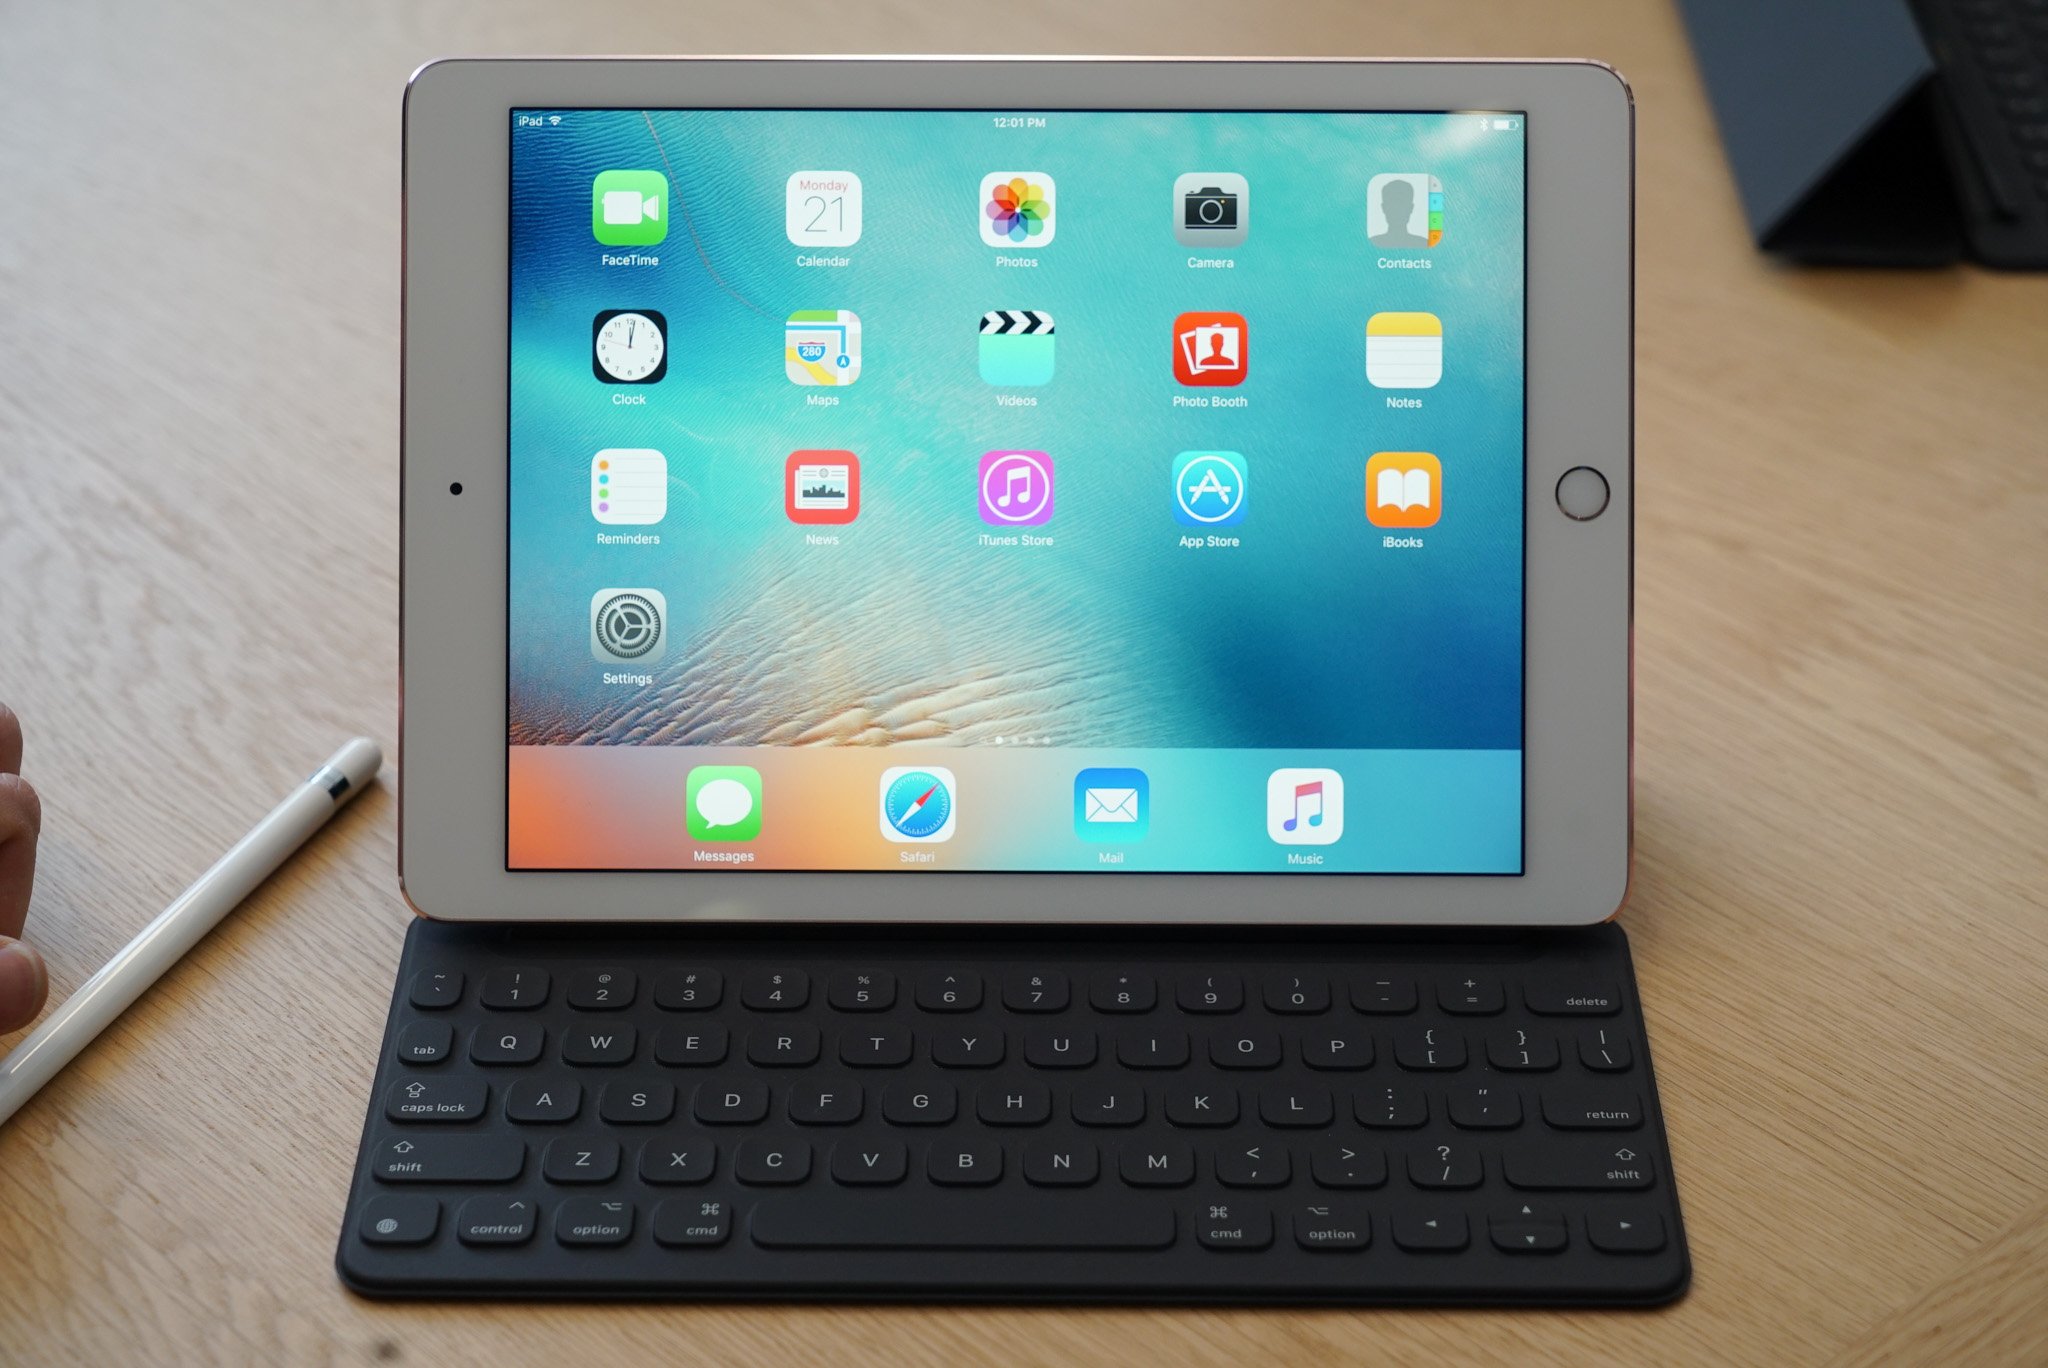 Apple releases new version of iOS 9.3.2 for the 9.7-inch iPad Pro